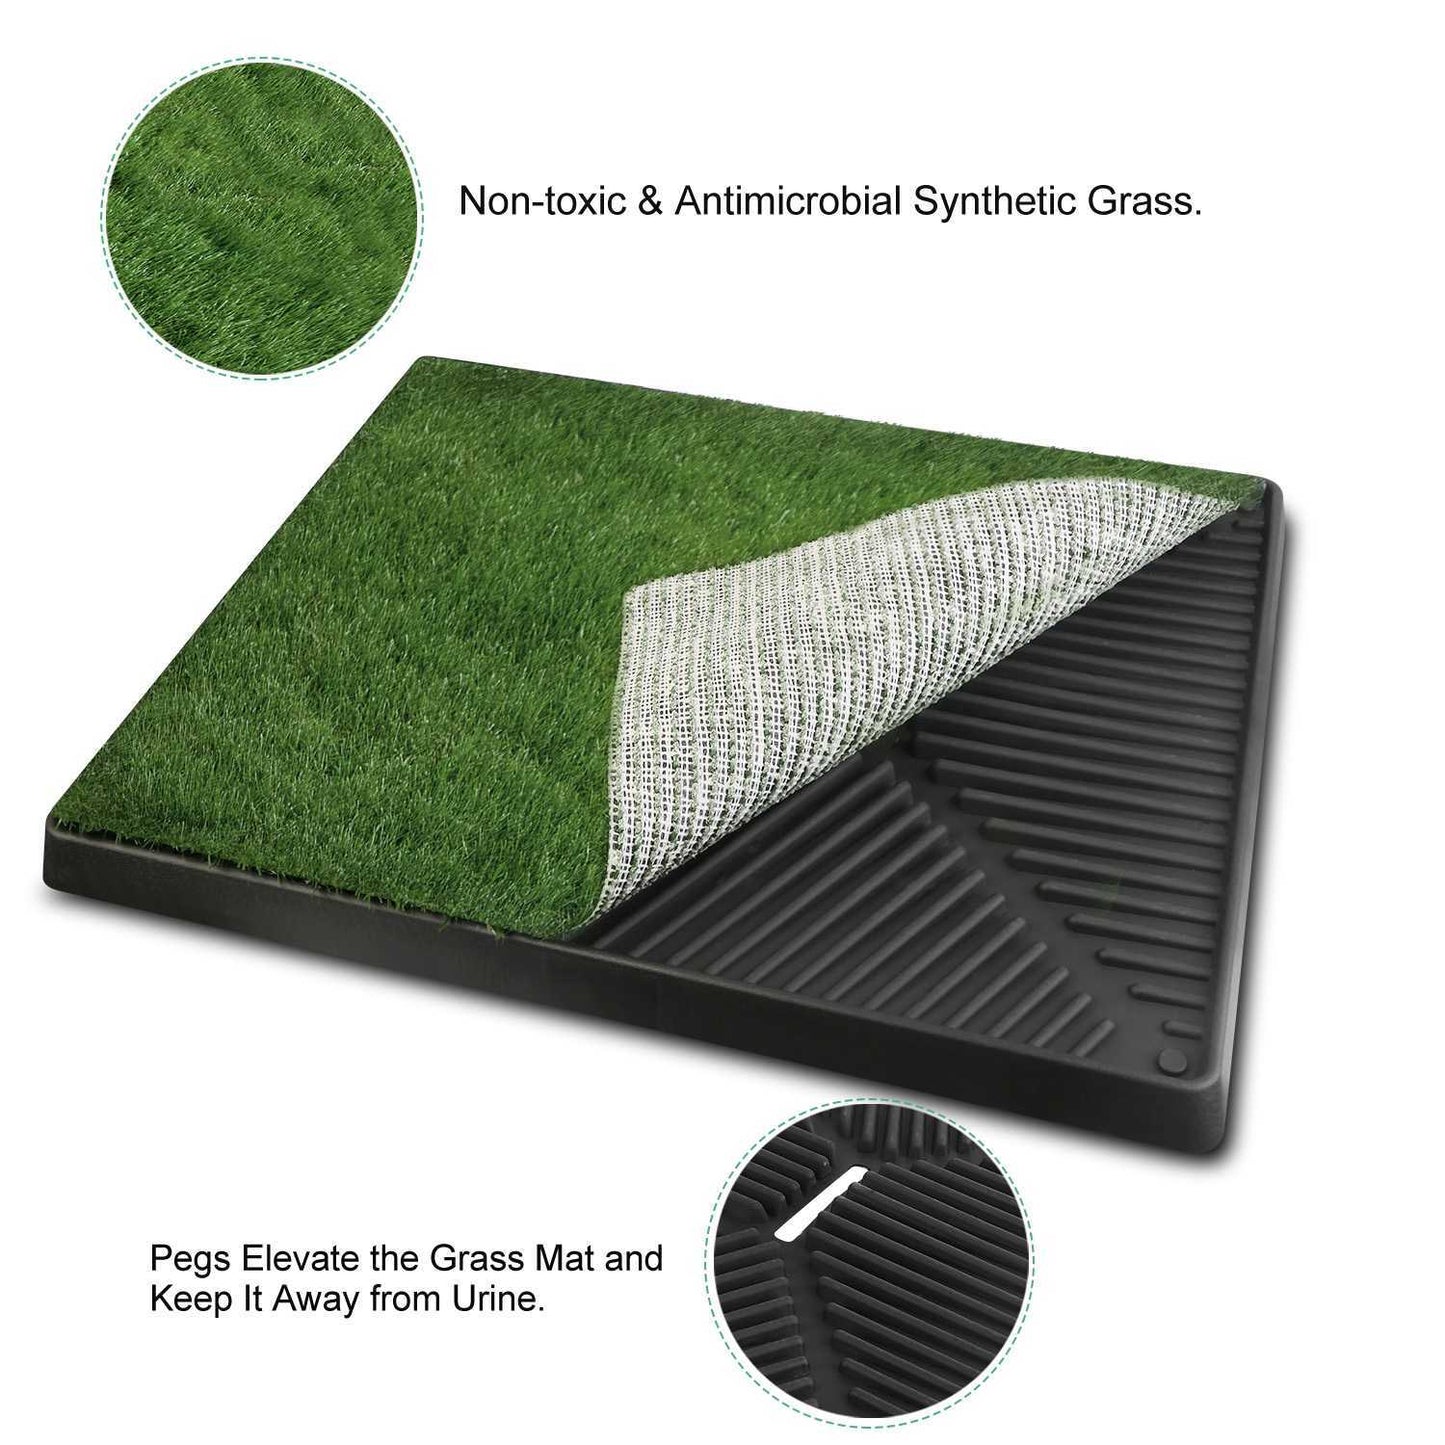 Dog Potty Training Artificial Grass Pad Pet Cat Toilet Trainer Mat Puppy Loo Tray Turf